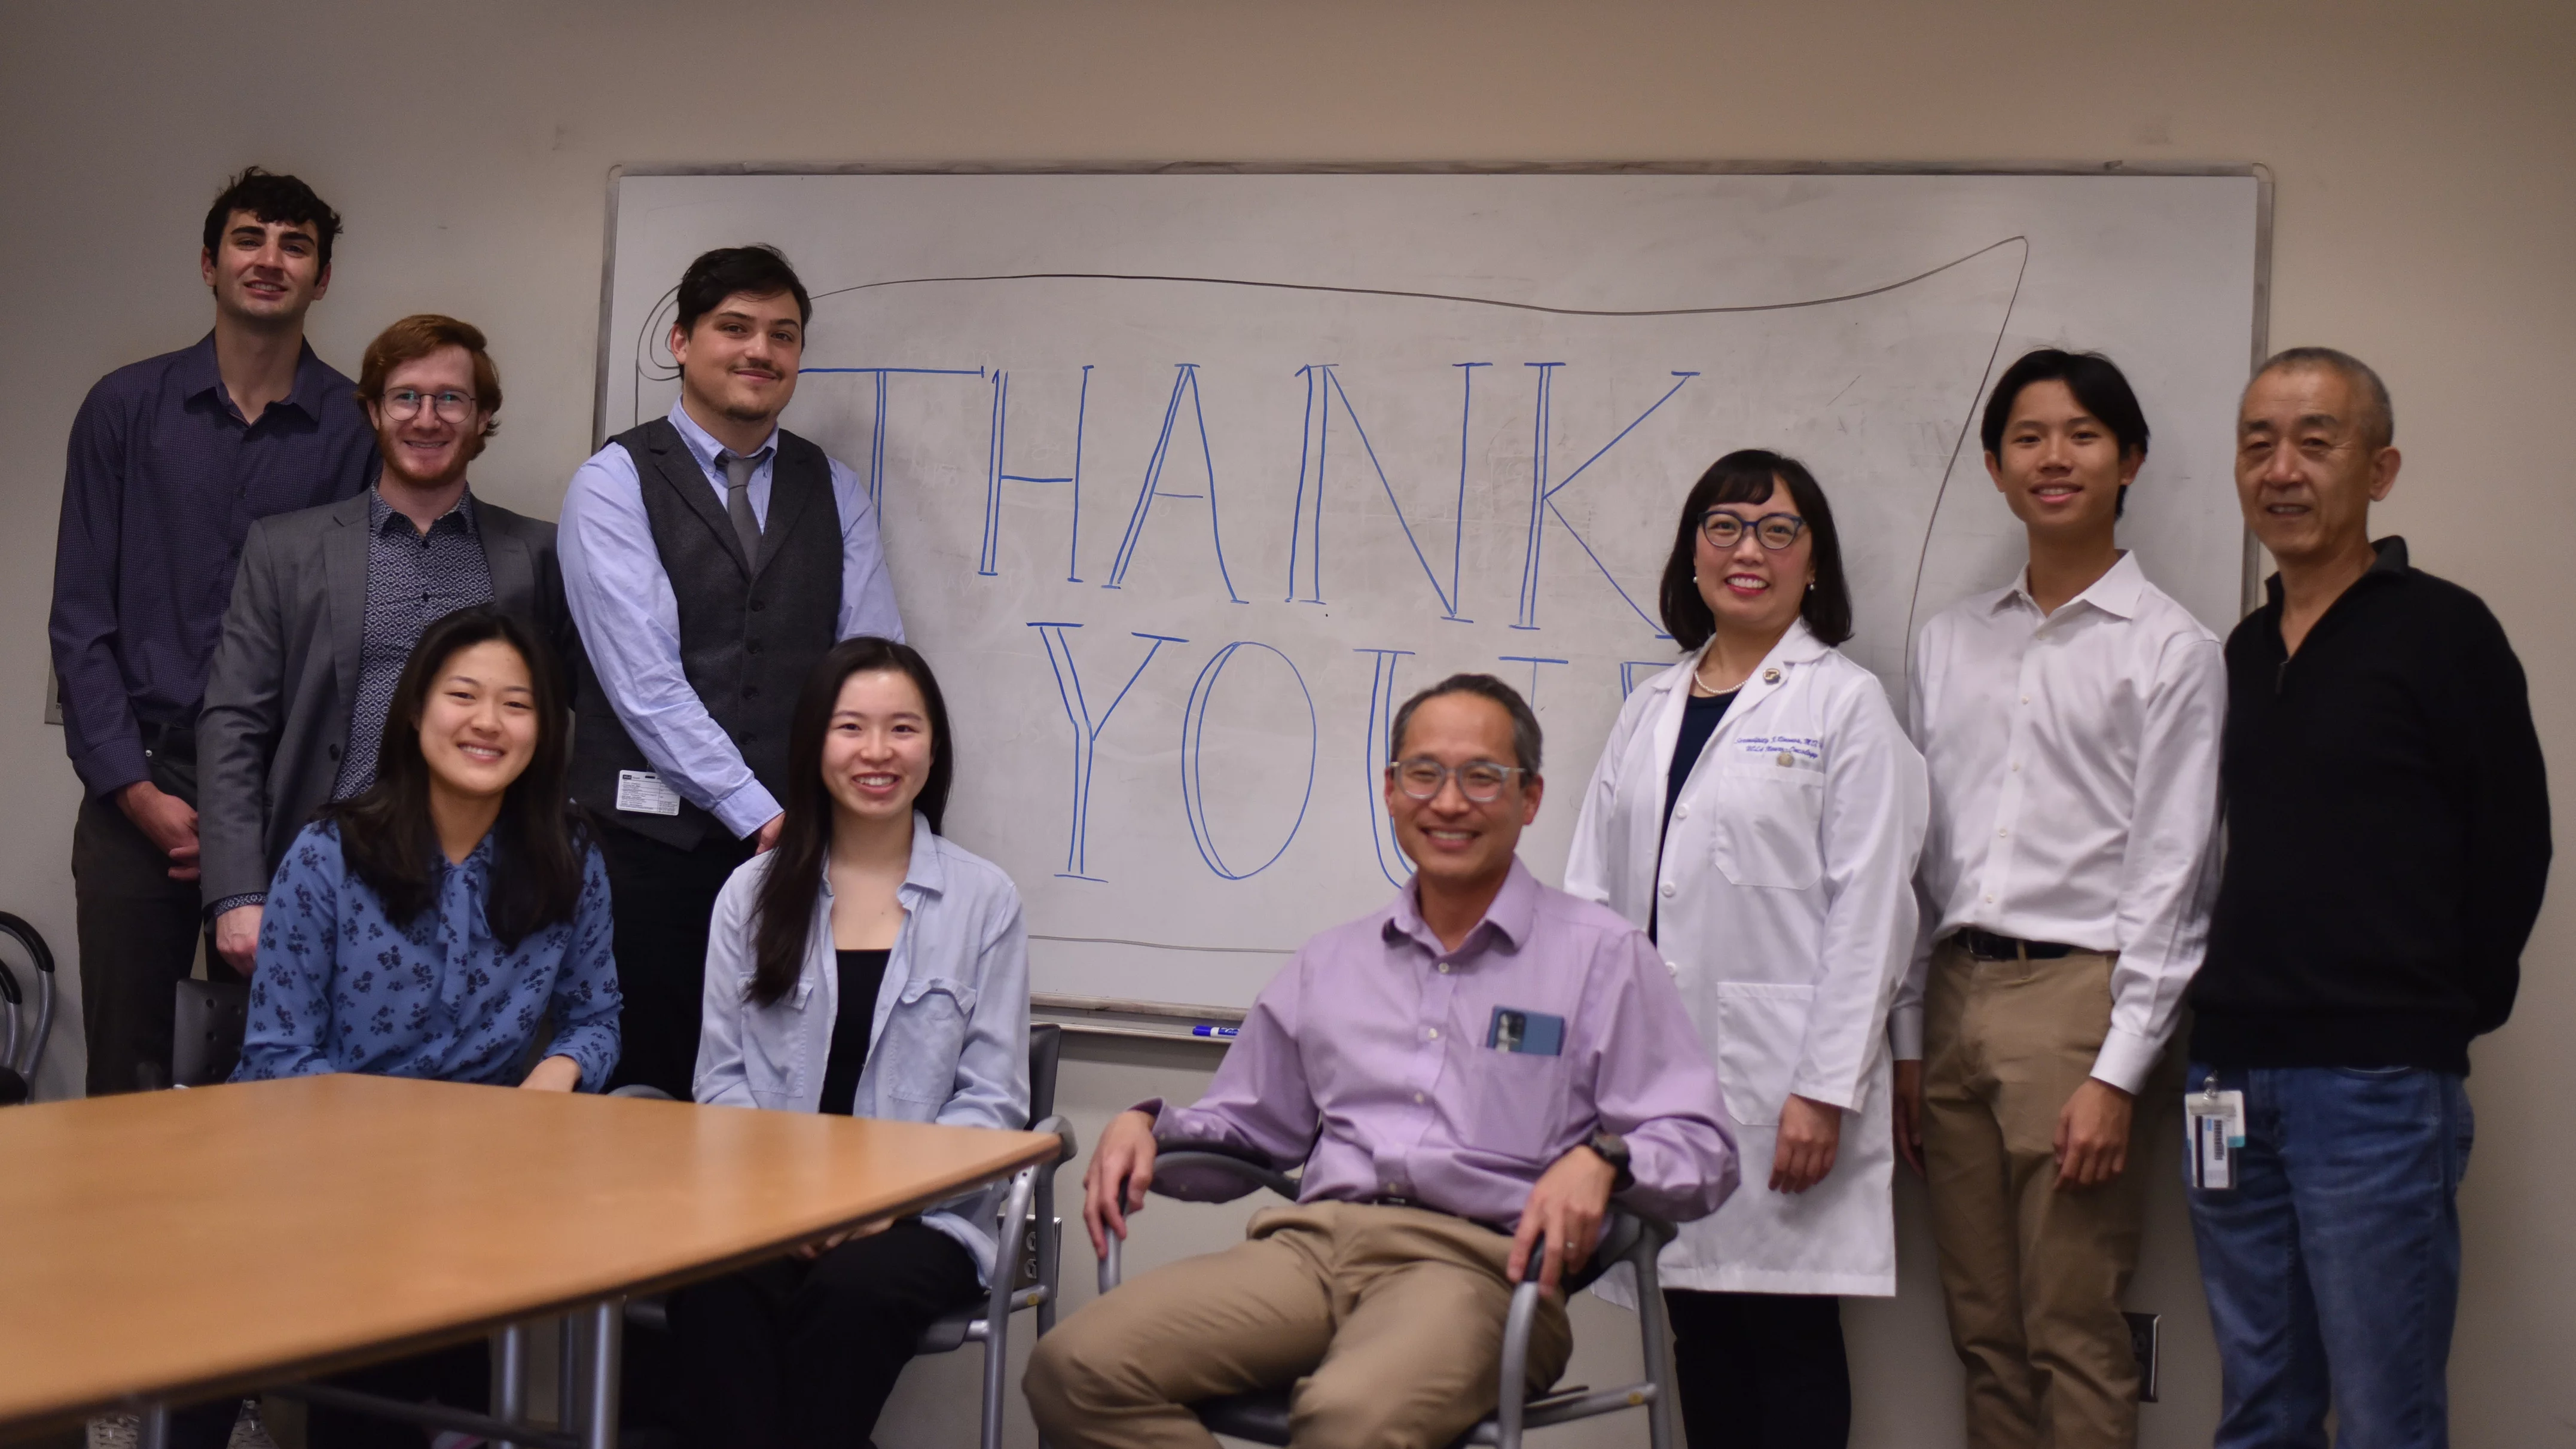 Lai lab members stand and sit at a table. A dry erase board behind them says "Thank you."